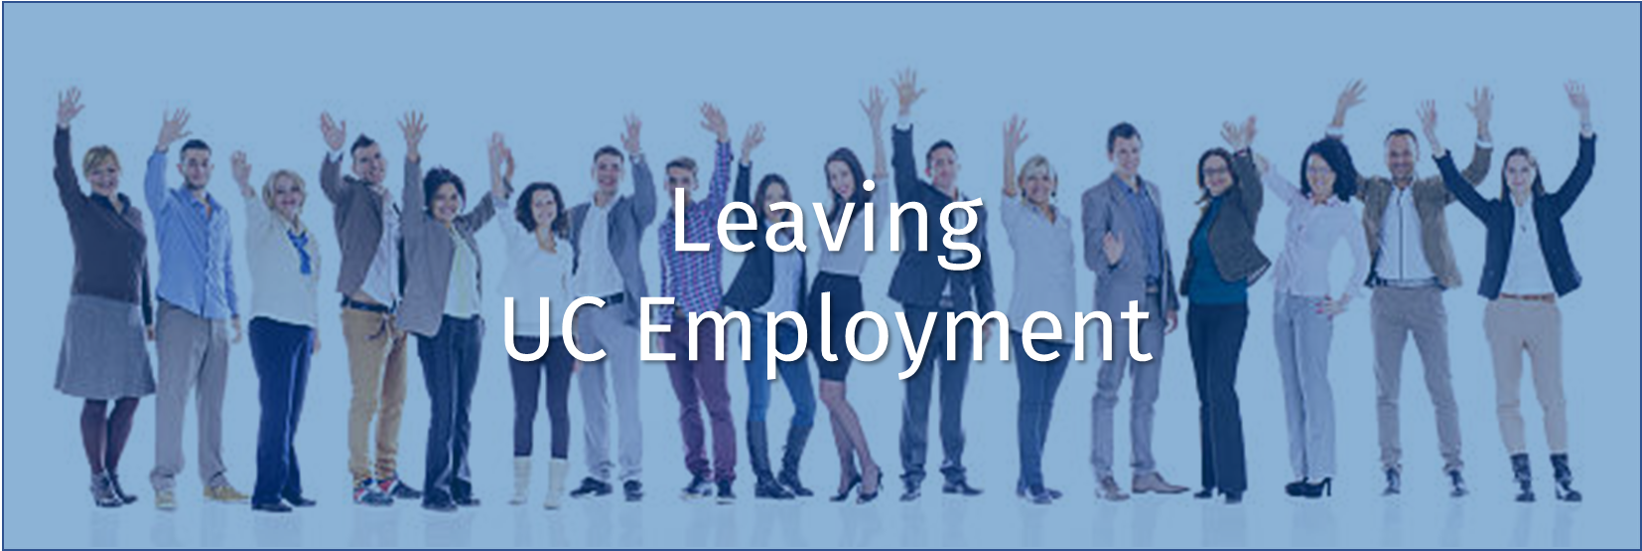 Employee Resources - Leaving UC Employment banner image